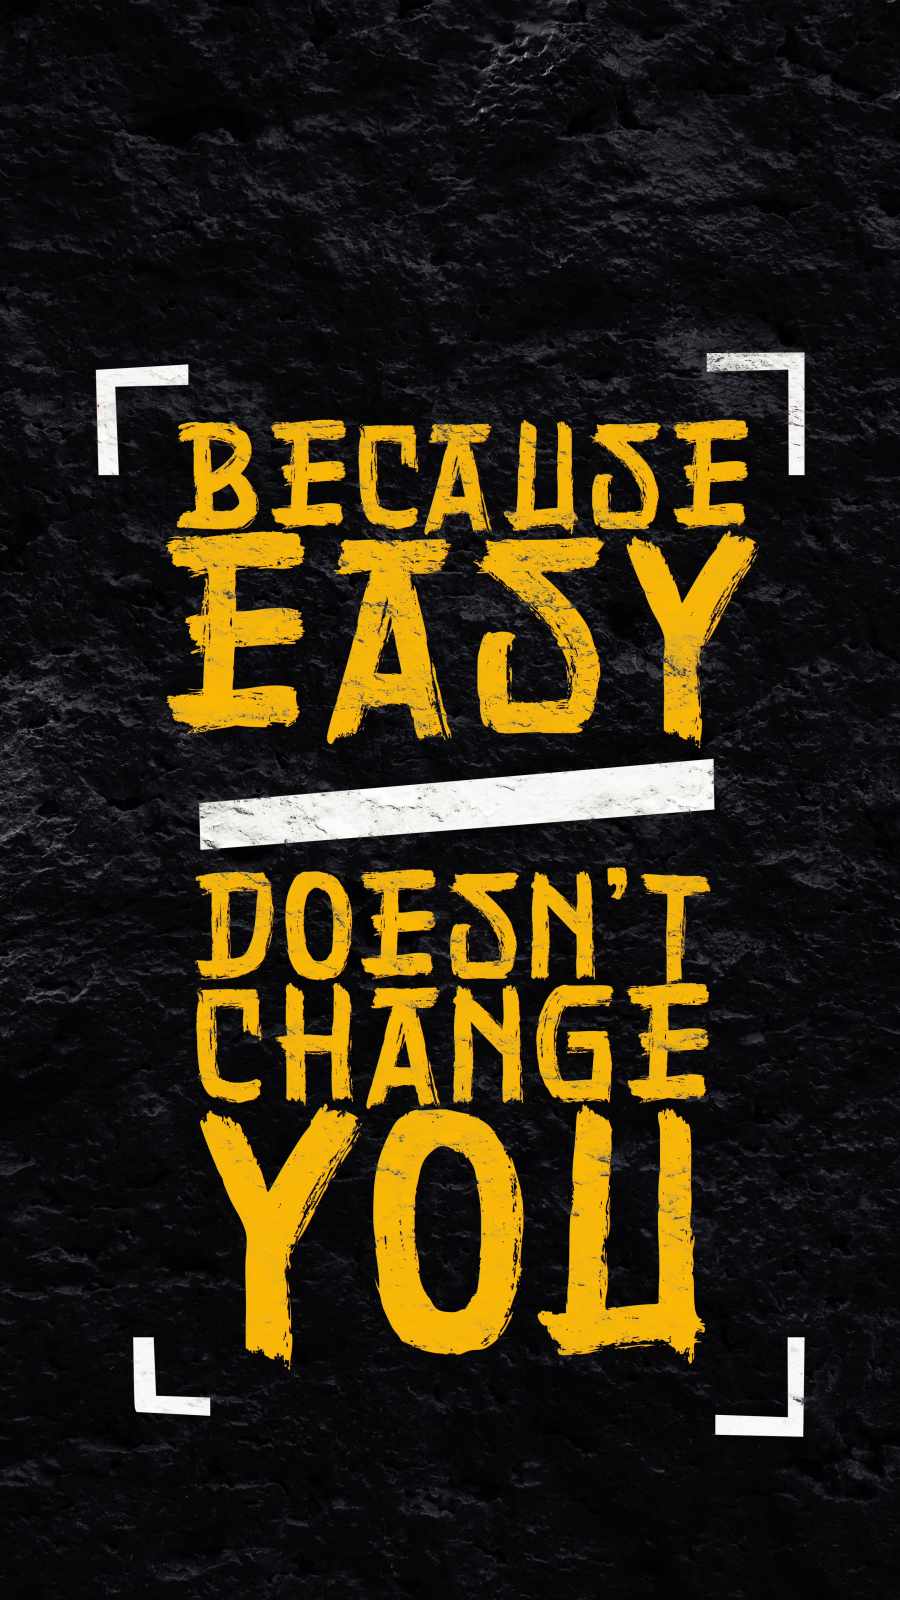 Easy Doesnt Change You